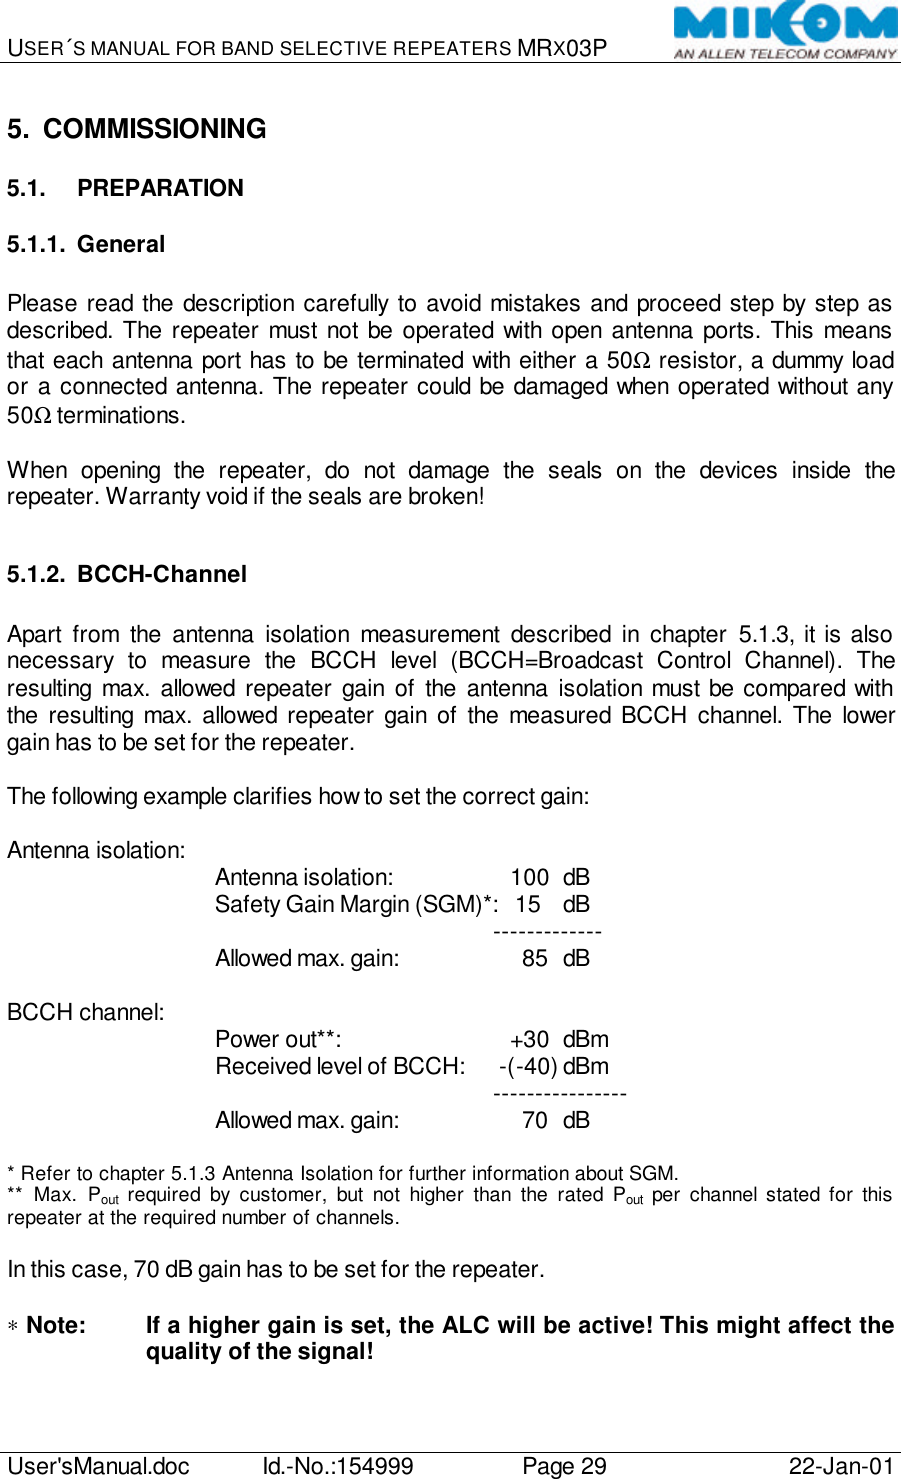 USER´S MANUAL FOR BAND SELECTIVE REPEATERS MRX03P   User&apos;sManual.doc Id.-No.:154999 Page 29 22-Jan-01  5. COMMISSIONING 5.1. PREPARATION 5.1.1. General  Please read the description carefully to avoid mistakes and proceed step by step as described. The repeater must not be operated with open antenna ports. This means that each antenna port has to be terminated with either a 50Ω resistor, a dummy load or a connected antenna. The repeater could be damaged when operated without any 50Ω terminations.  When opening the repeater, do not damage the seals on the devices inside the repeater. Warranty void if the seals are broken!  5.1.2. BCCH-Channel  Apart from the antenna isolation measurement described in chapter 5.1.3, it is also necessary to measure the BCCH level (BCCH=Broadcast Control Channel). The resulting max. allowed repeater gain of the antenna isolation must be compared with the resulting max. allowed repeater gain of the measured BCCH channel. The lower gain has to be set for the repeater.  The following example clarifies how to set the correct gain:  Antenna isolation: Antenna isolation:       100 dB Safety Gain Margin (SGM)*:   15 dB     ------------- Allowed max. gain:         85 dB  BCCH channel: Power out**:         +30 dBm Received level of BCCH:   -(-40) dBm     ---------------- Allowed max. gain:         70 dB  * Refer to chapter 5.1.3 Antenna Isolation for further information about SGM. ** Max. Pout required by customer, but not higher than the rated Pout per channel stated for this repeater at the required number of channels.  In this case, 70 dB gain has to be set for the repeater.  ∗ Note: If a higher gain is set, the ALC will be active! This might affect the quality of the signal! 